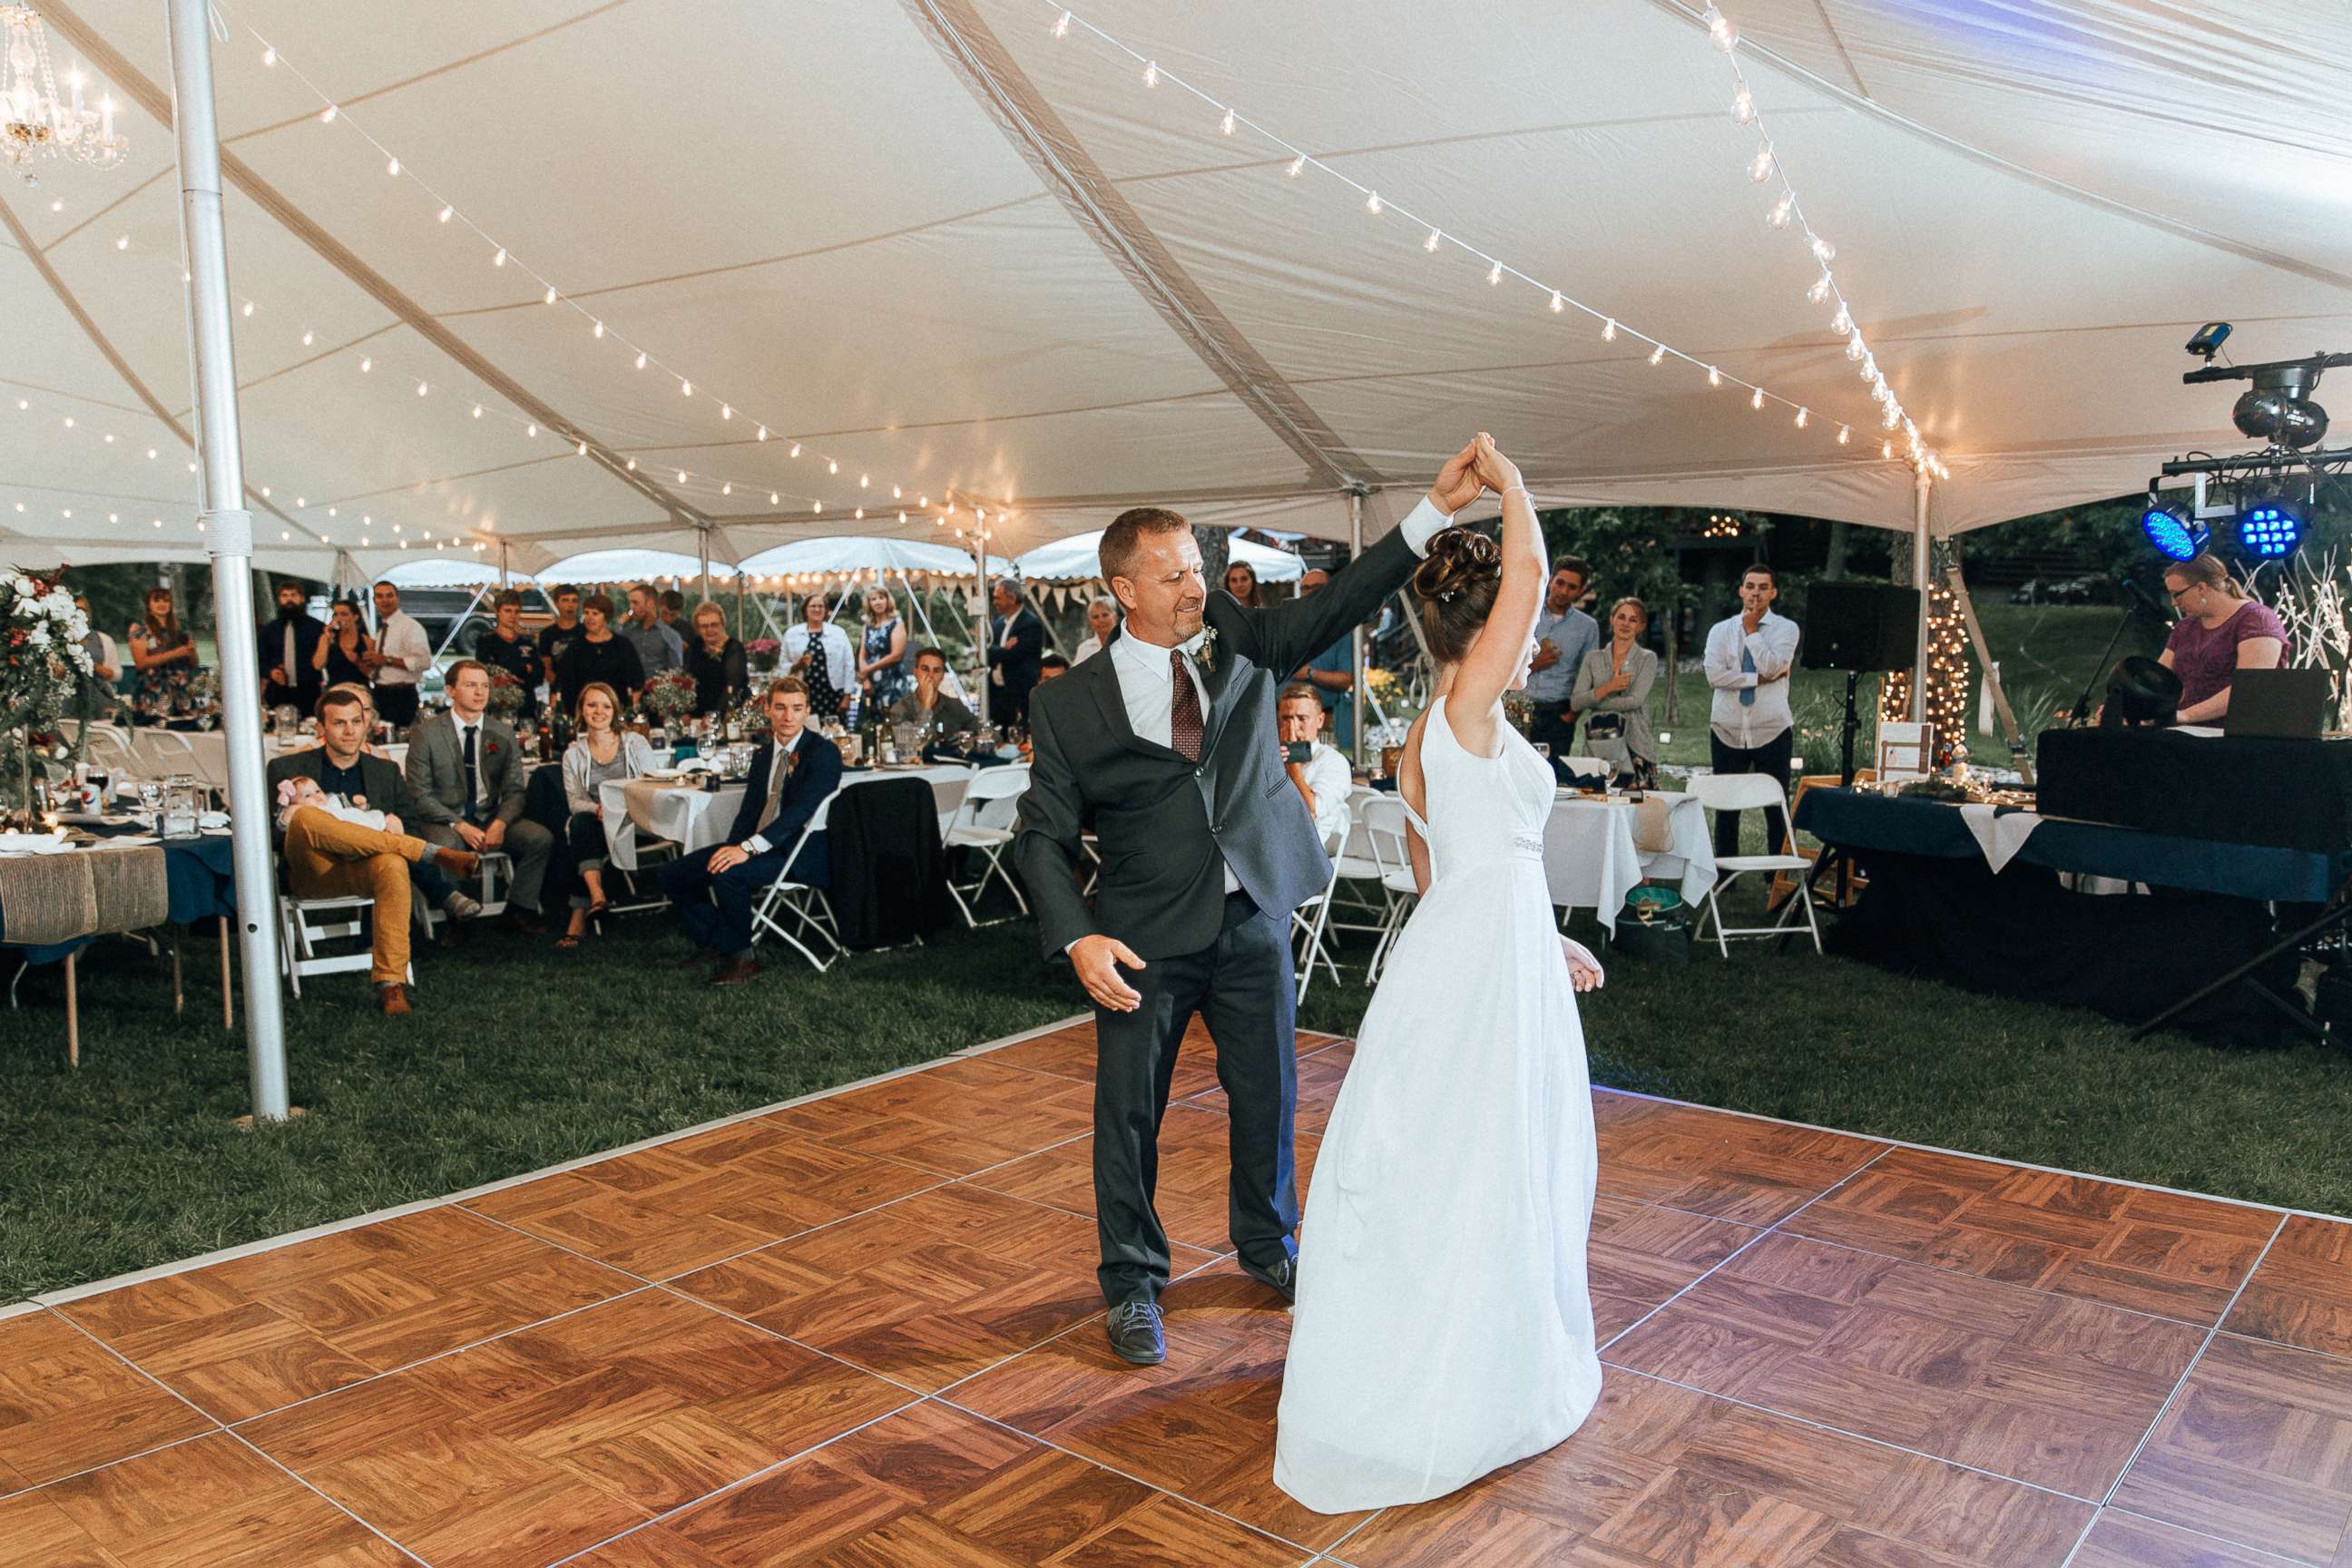 PHOTO: Zak Fick couldn't contain his emotions watching his sister dance with their father after her Aug. 5 wedding in Pequot Lakes, Minnesota.